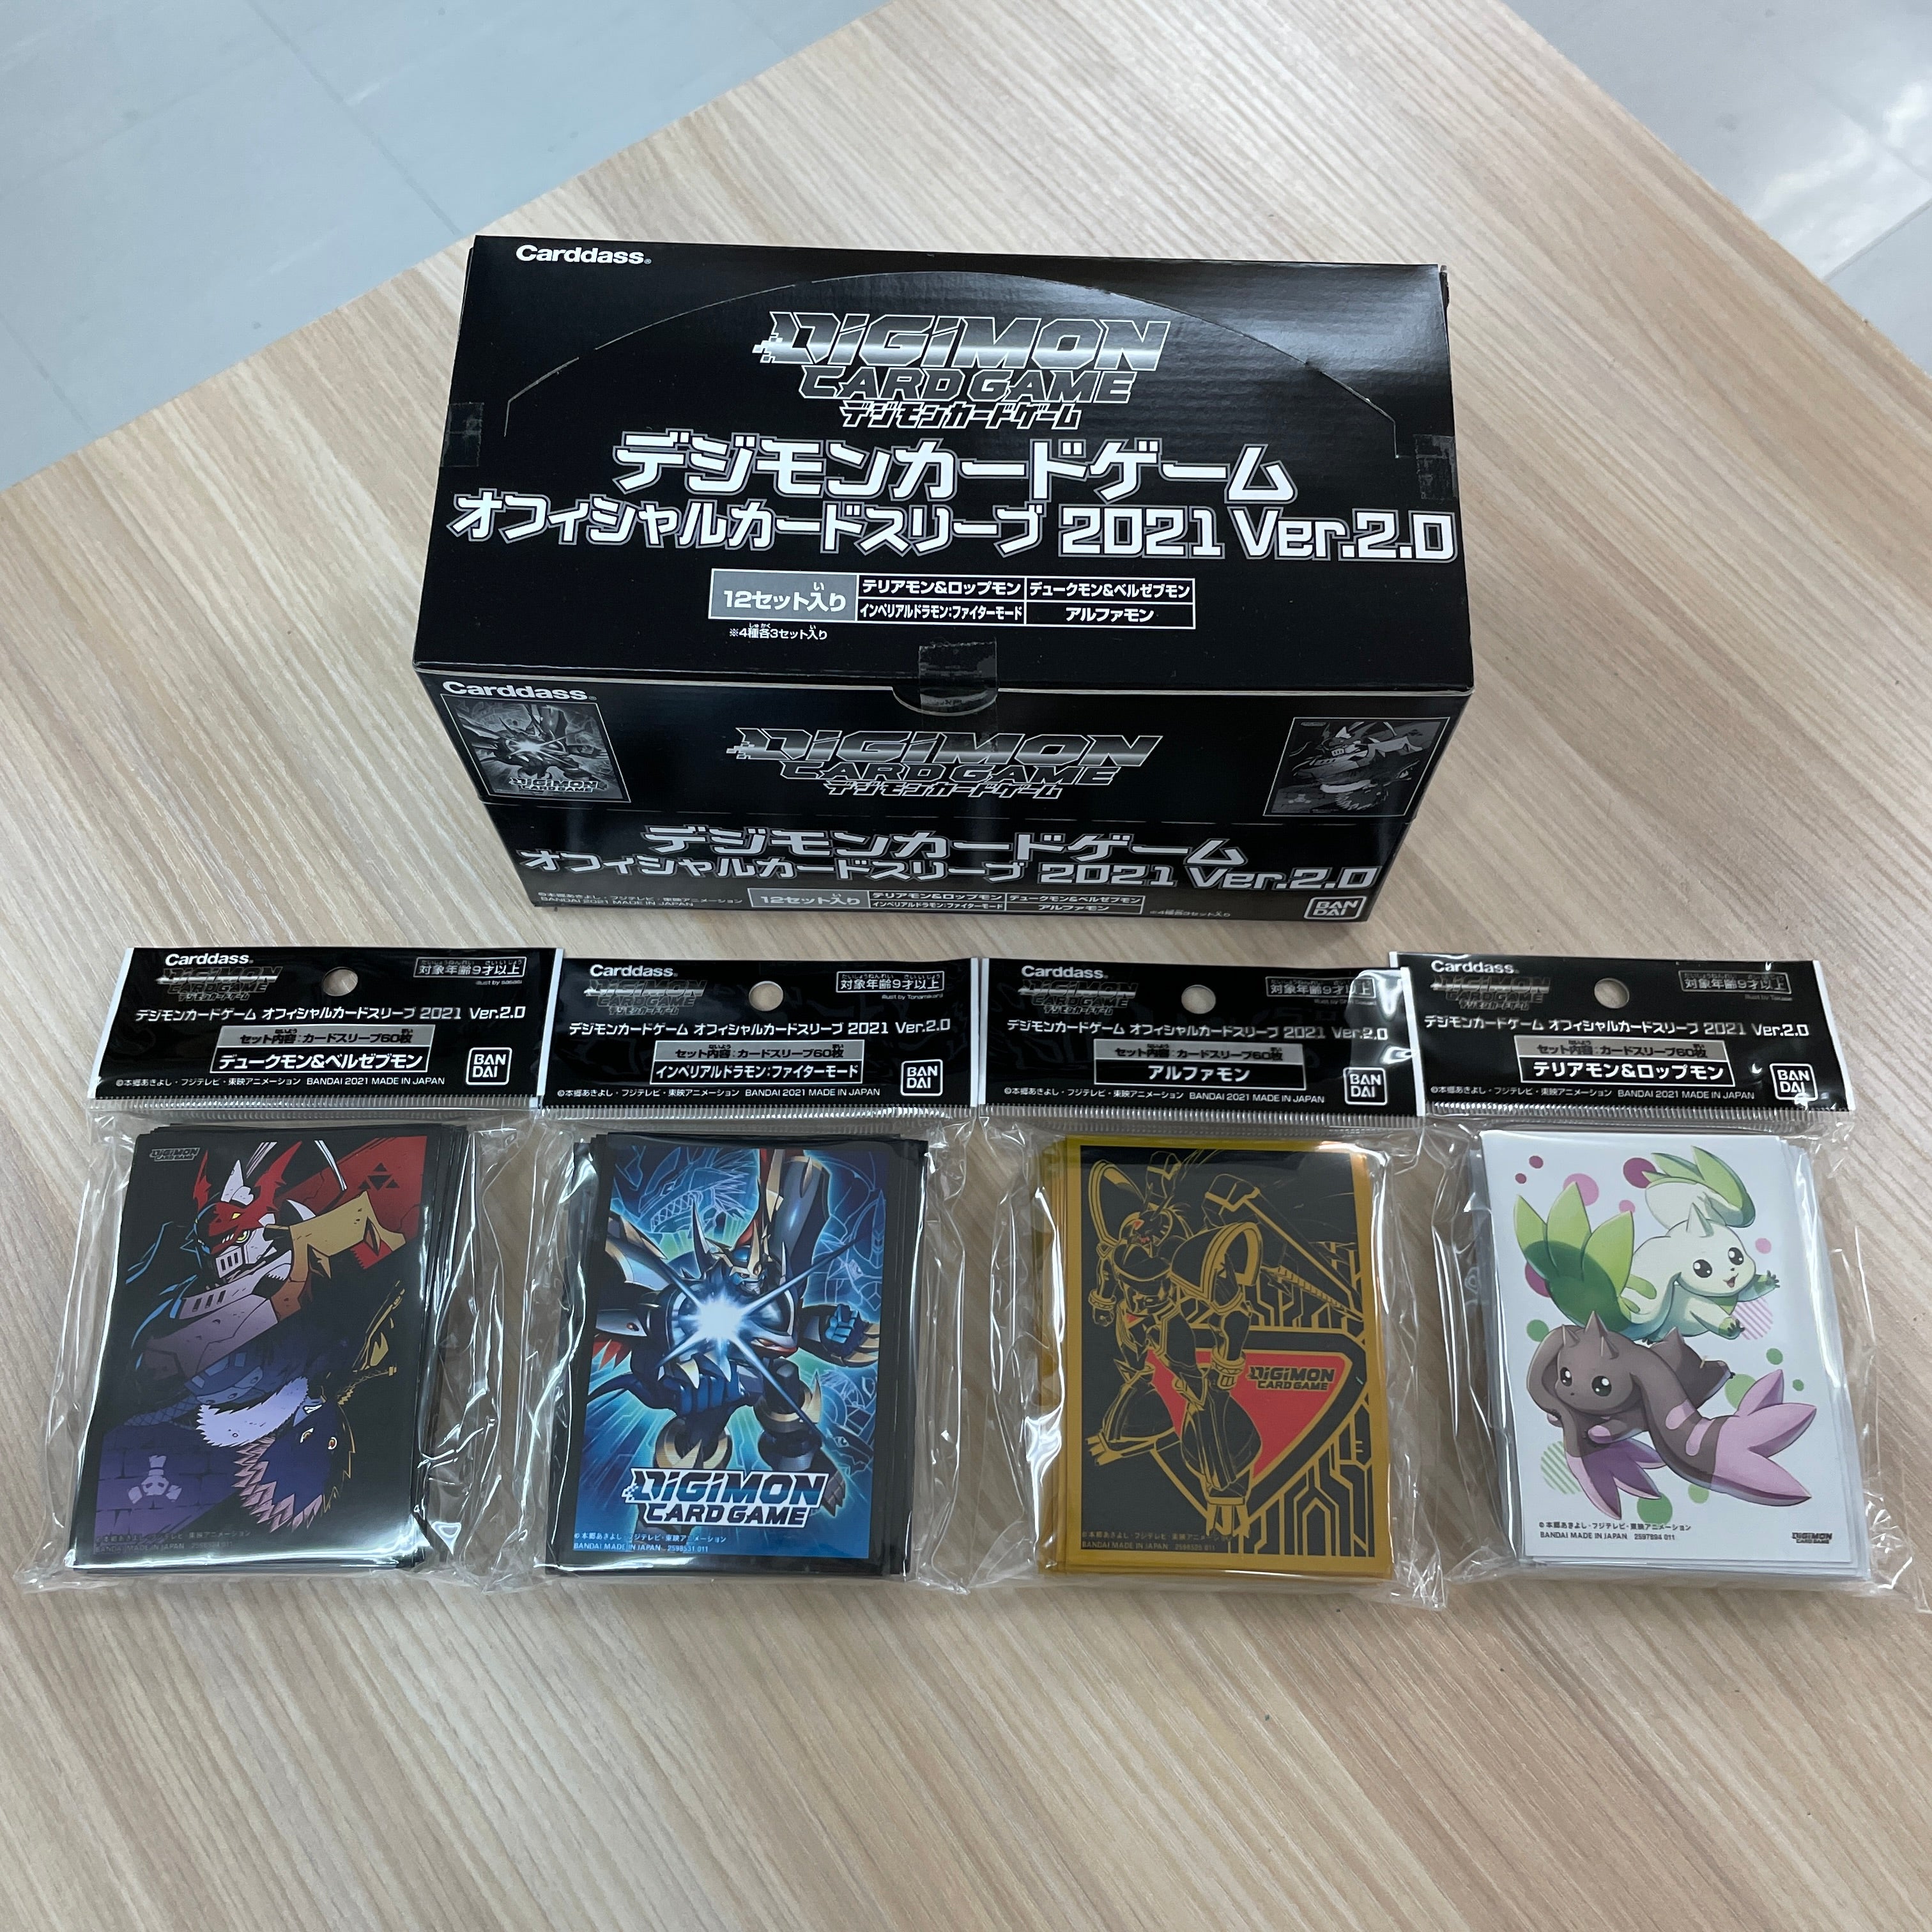 DIGIMON CARD GAME Official Card Sleeve 2021 Ver.2.0 Box